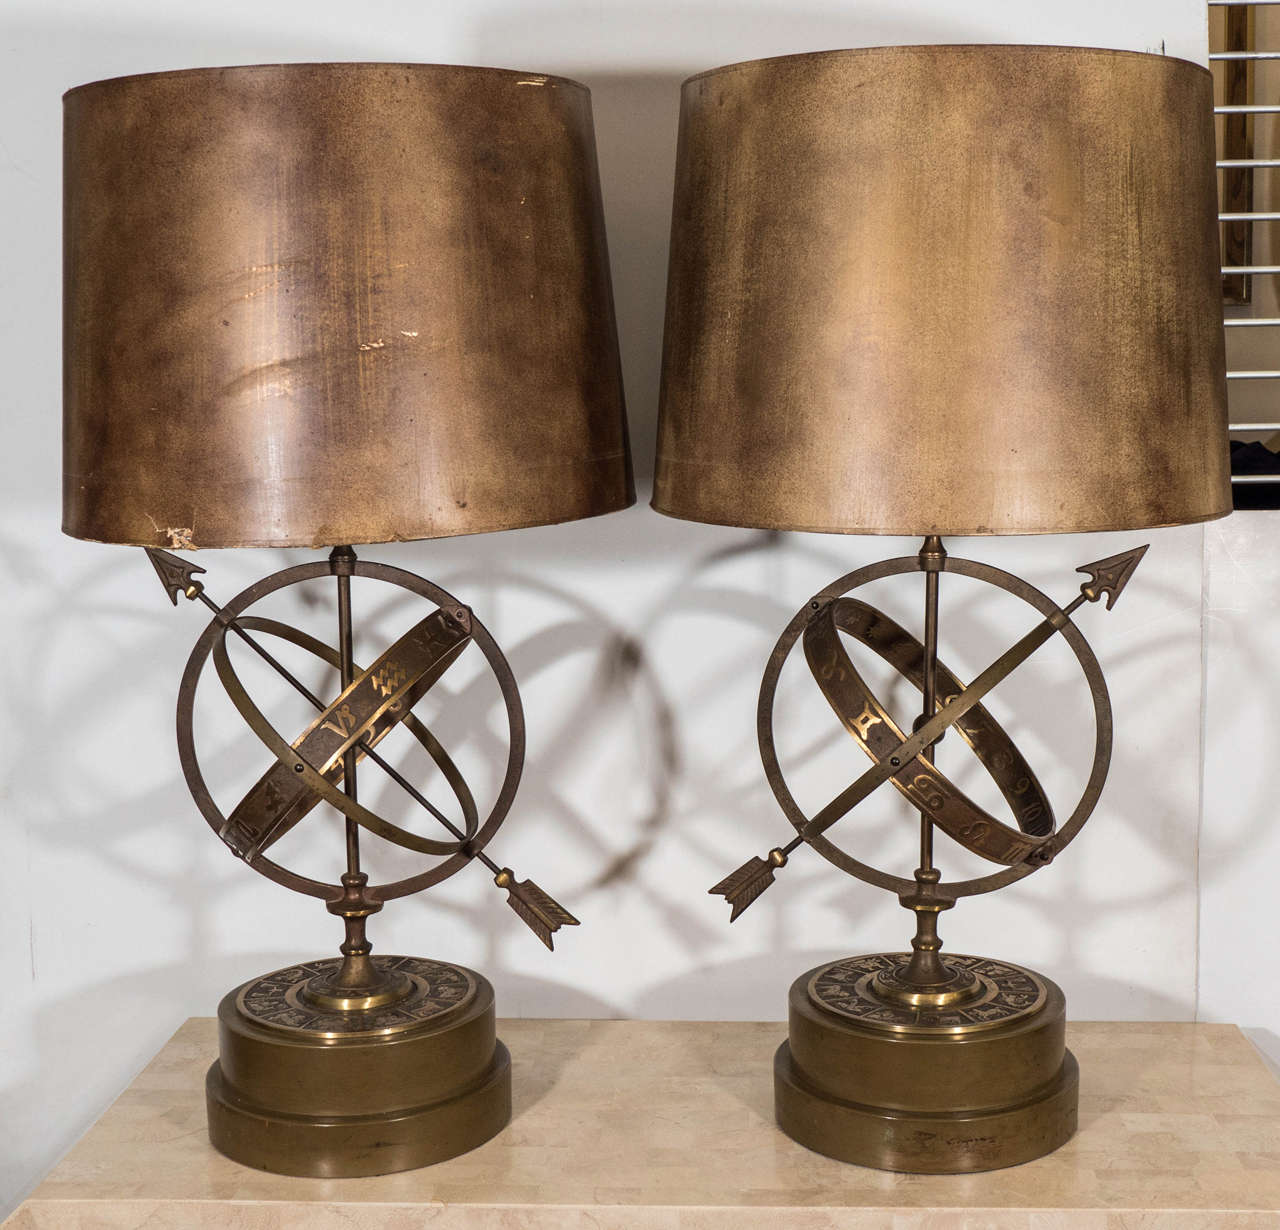 Fantastical pair of bronze table lamps in the form of celestial 'astrolabes', produced, circa 1940s, with stylistic piercing arrows, central globe and decorative signs of the zodiac, detailed against one of three surrounding crossed circular bands